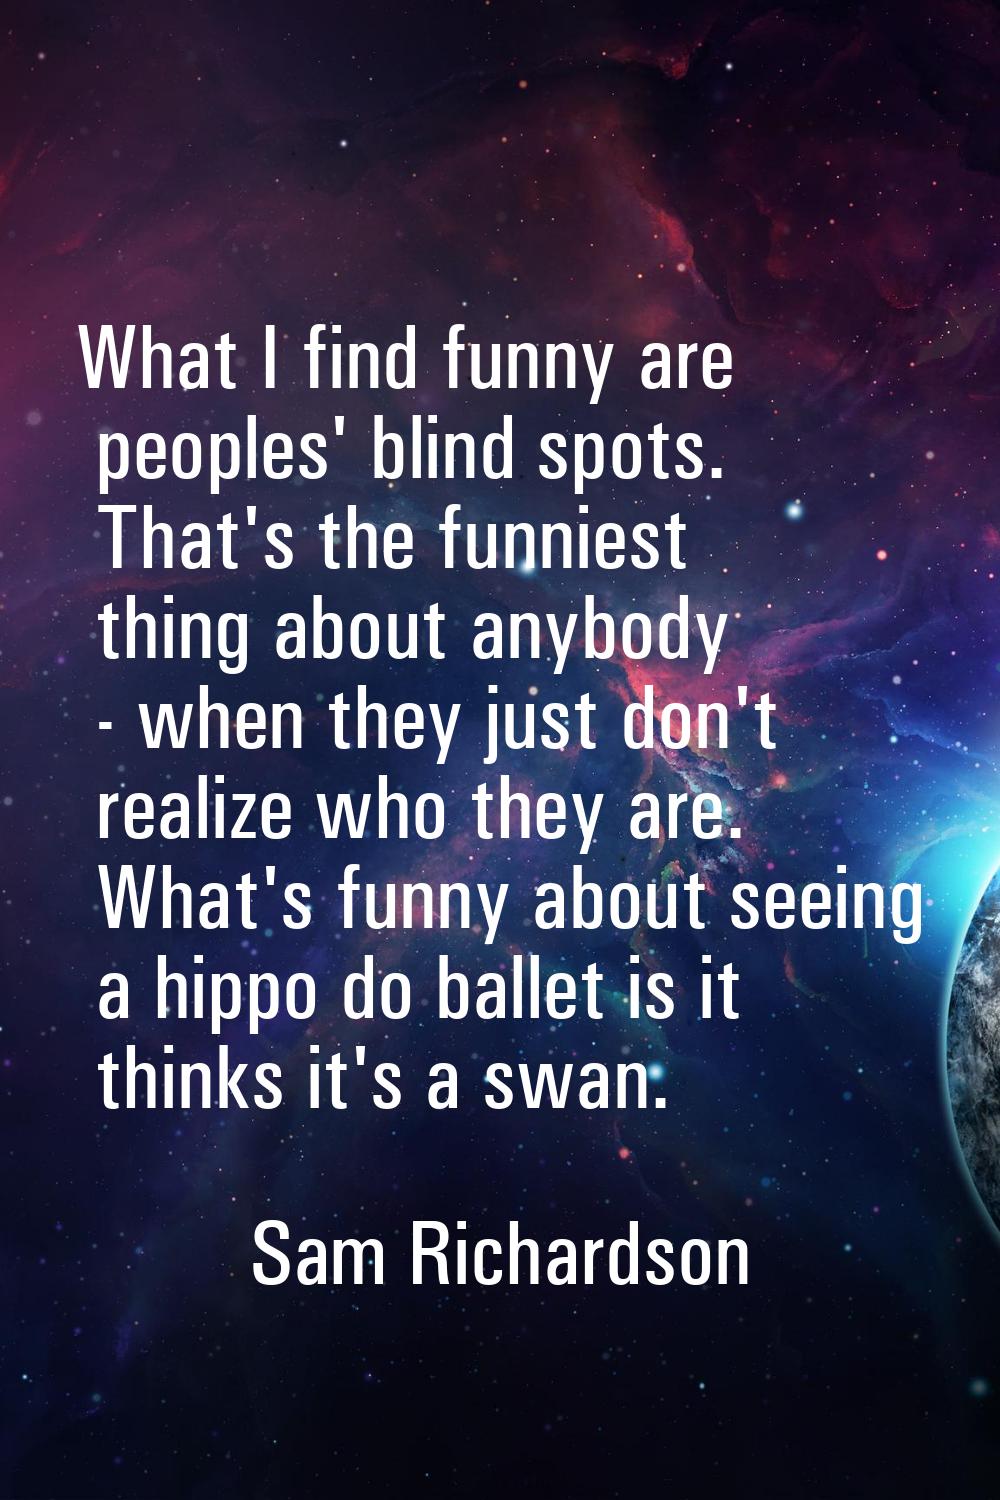 What I find funny are peoples' blind spots. That's the funniest thing about anybody - when they jus